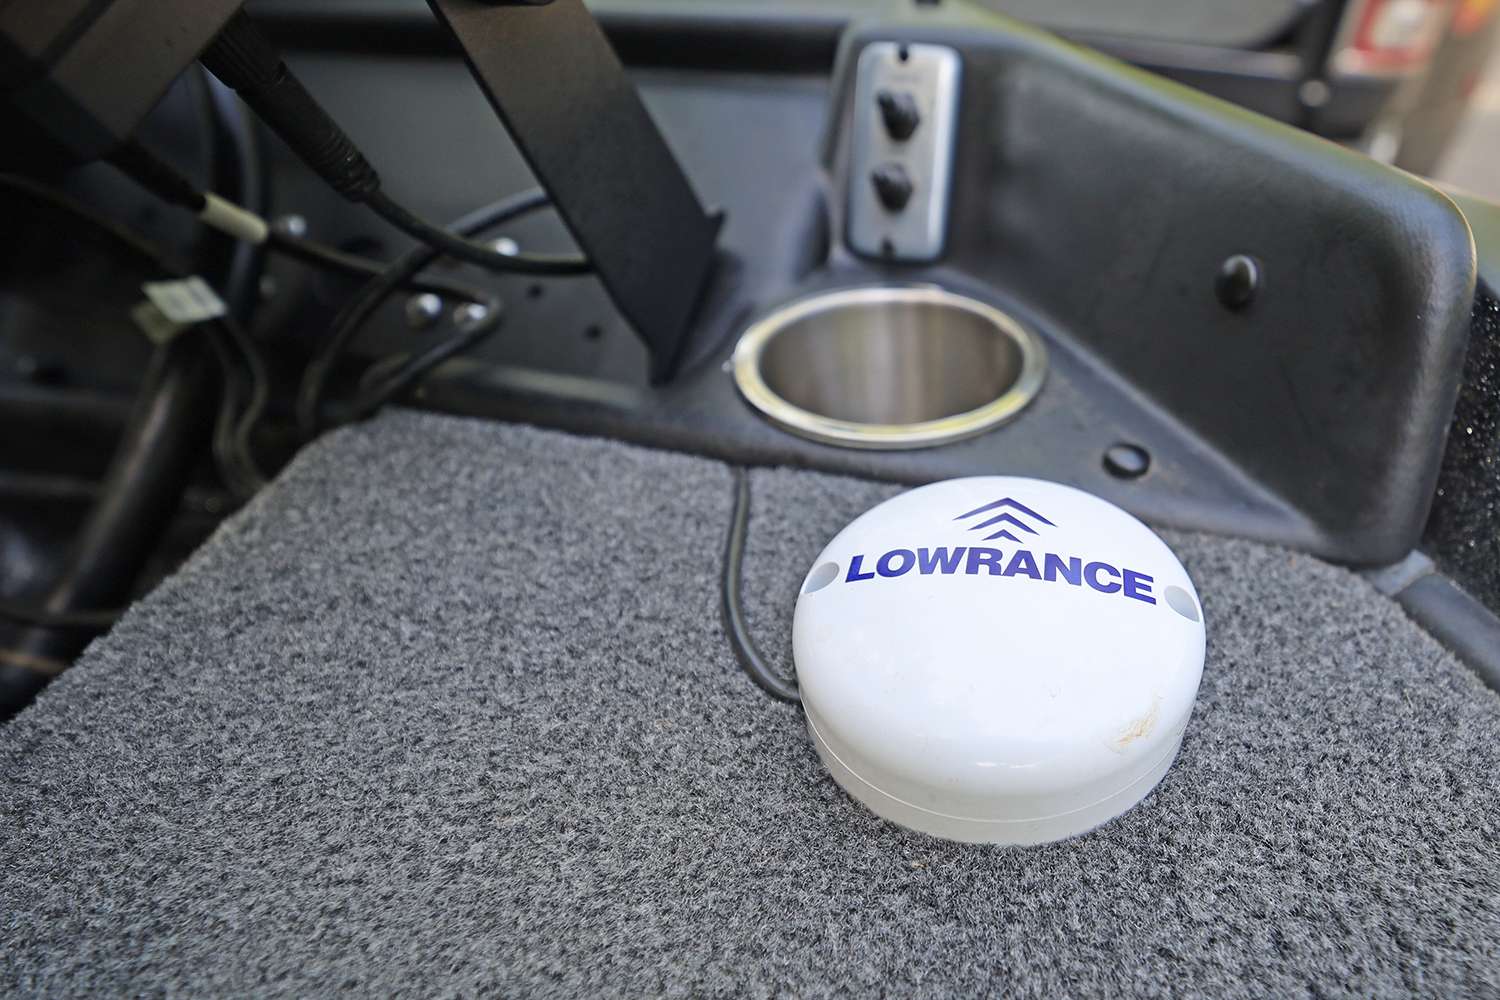 The Lowrance GPS puck is positioned near the other Lowrance equipment for precise GPS locations.